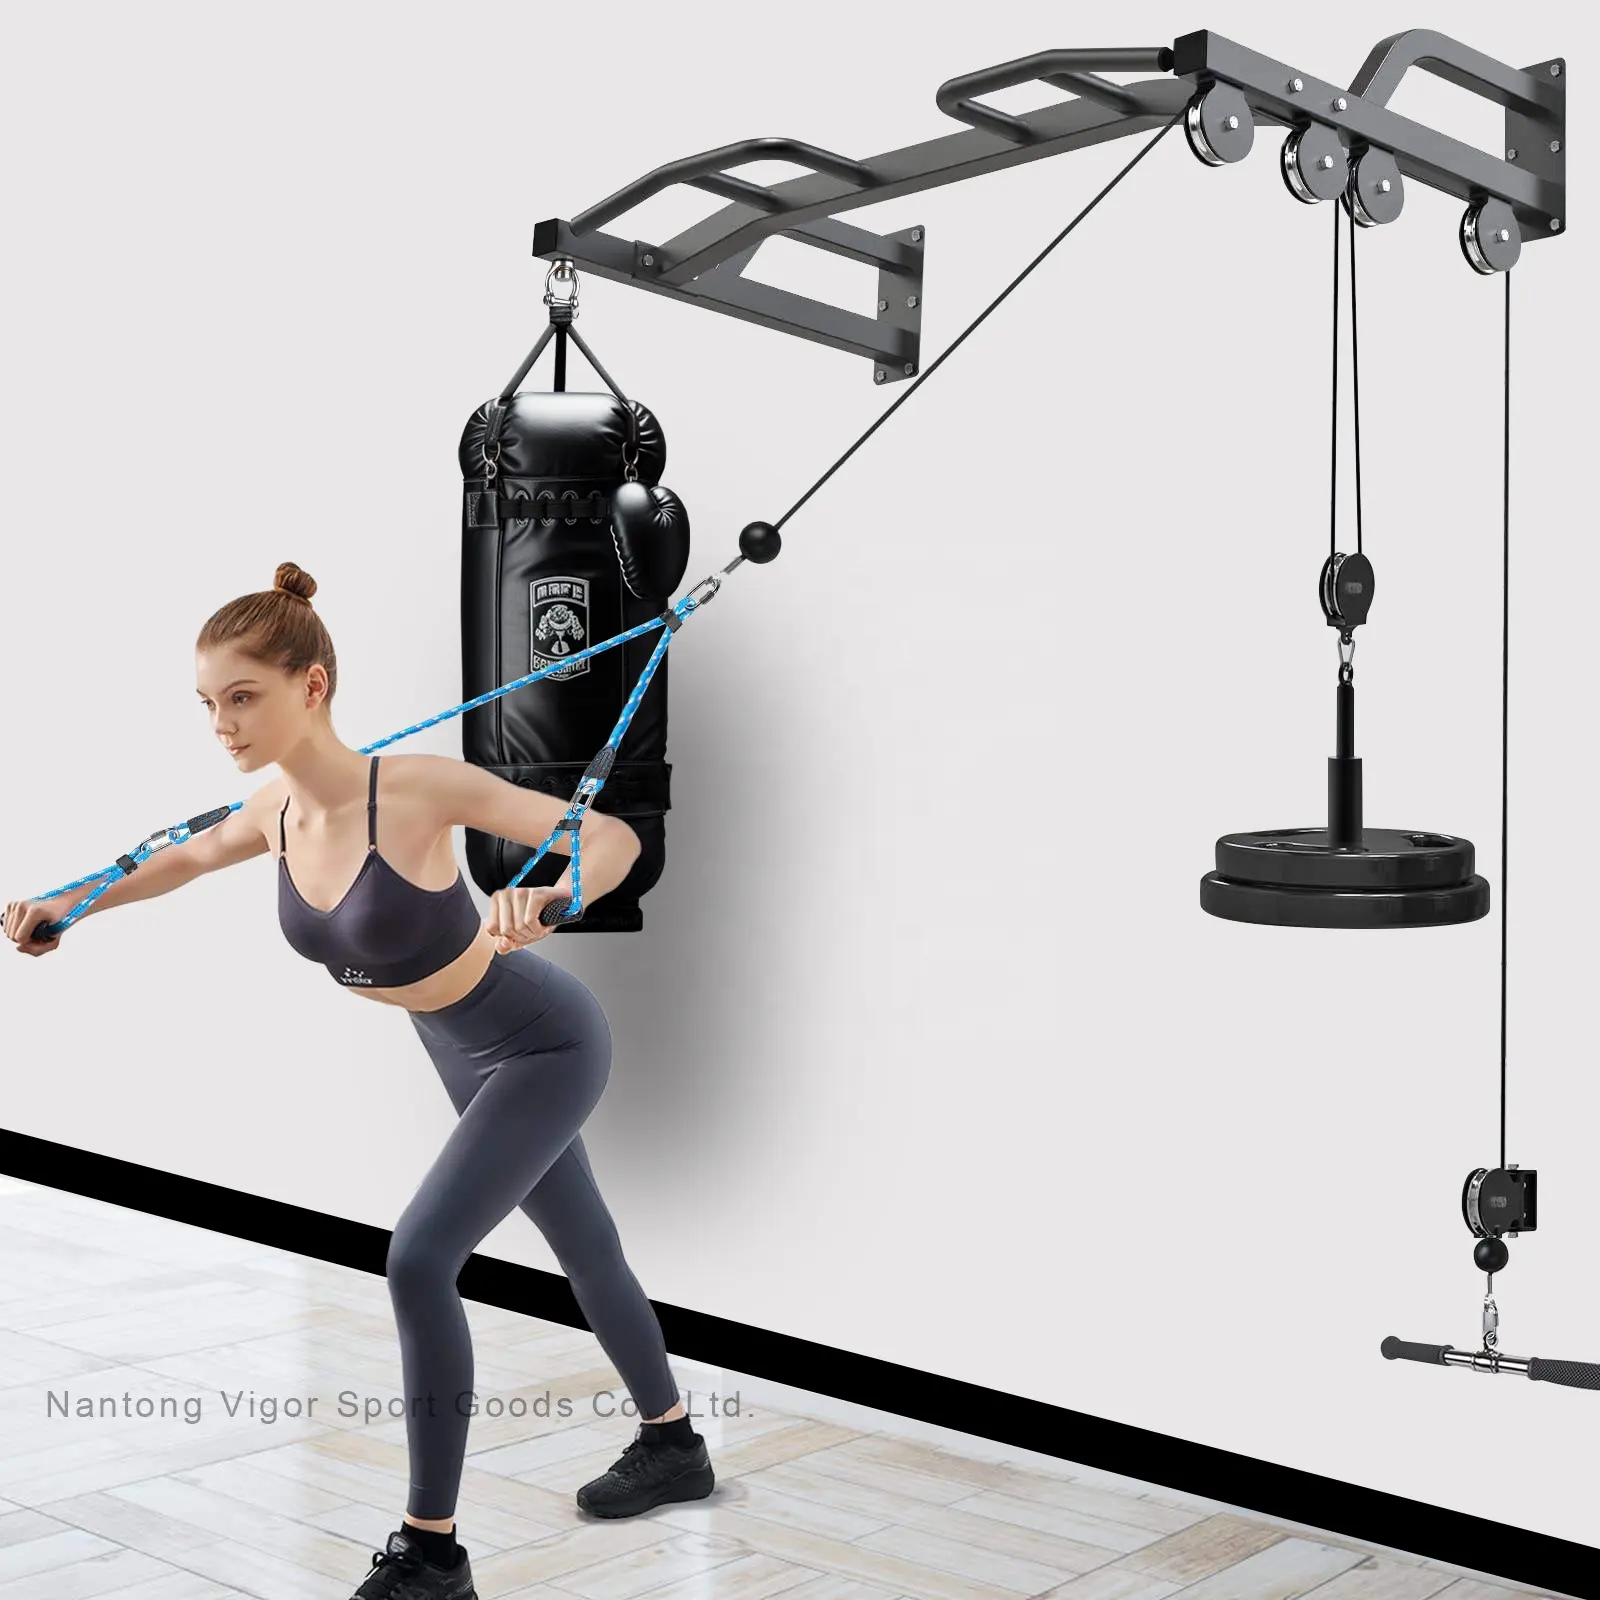 Heavy Duty Wall Mounted Pull Up Bar Cable Machine Lifting Pulley System High Pull Down Rally Sports EquipmentBoxing sandbag rack